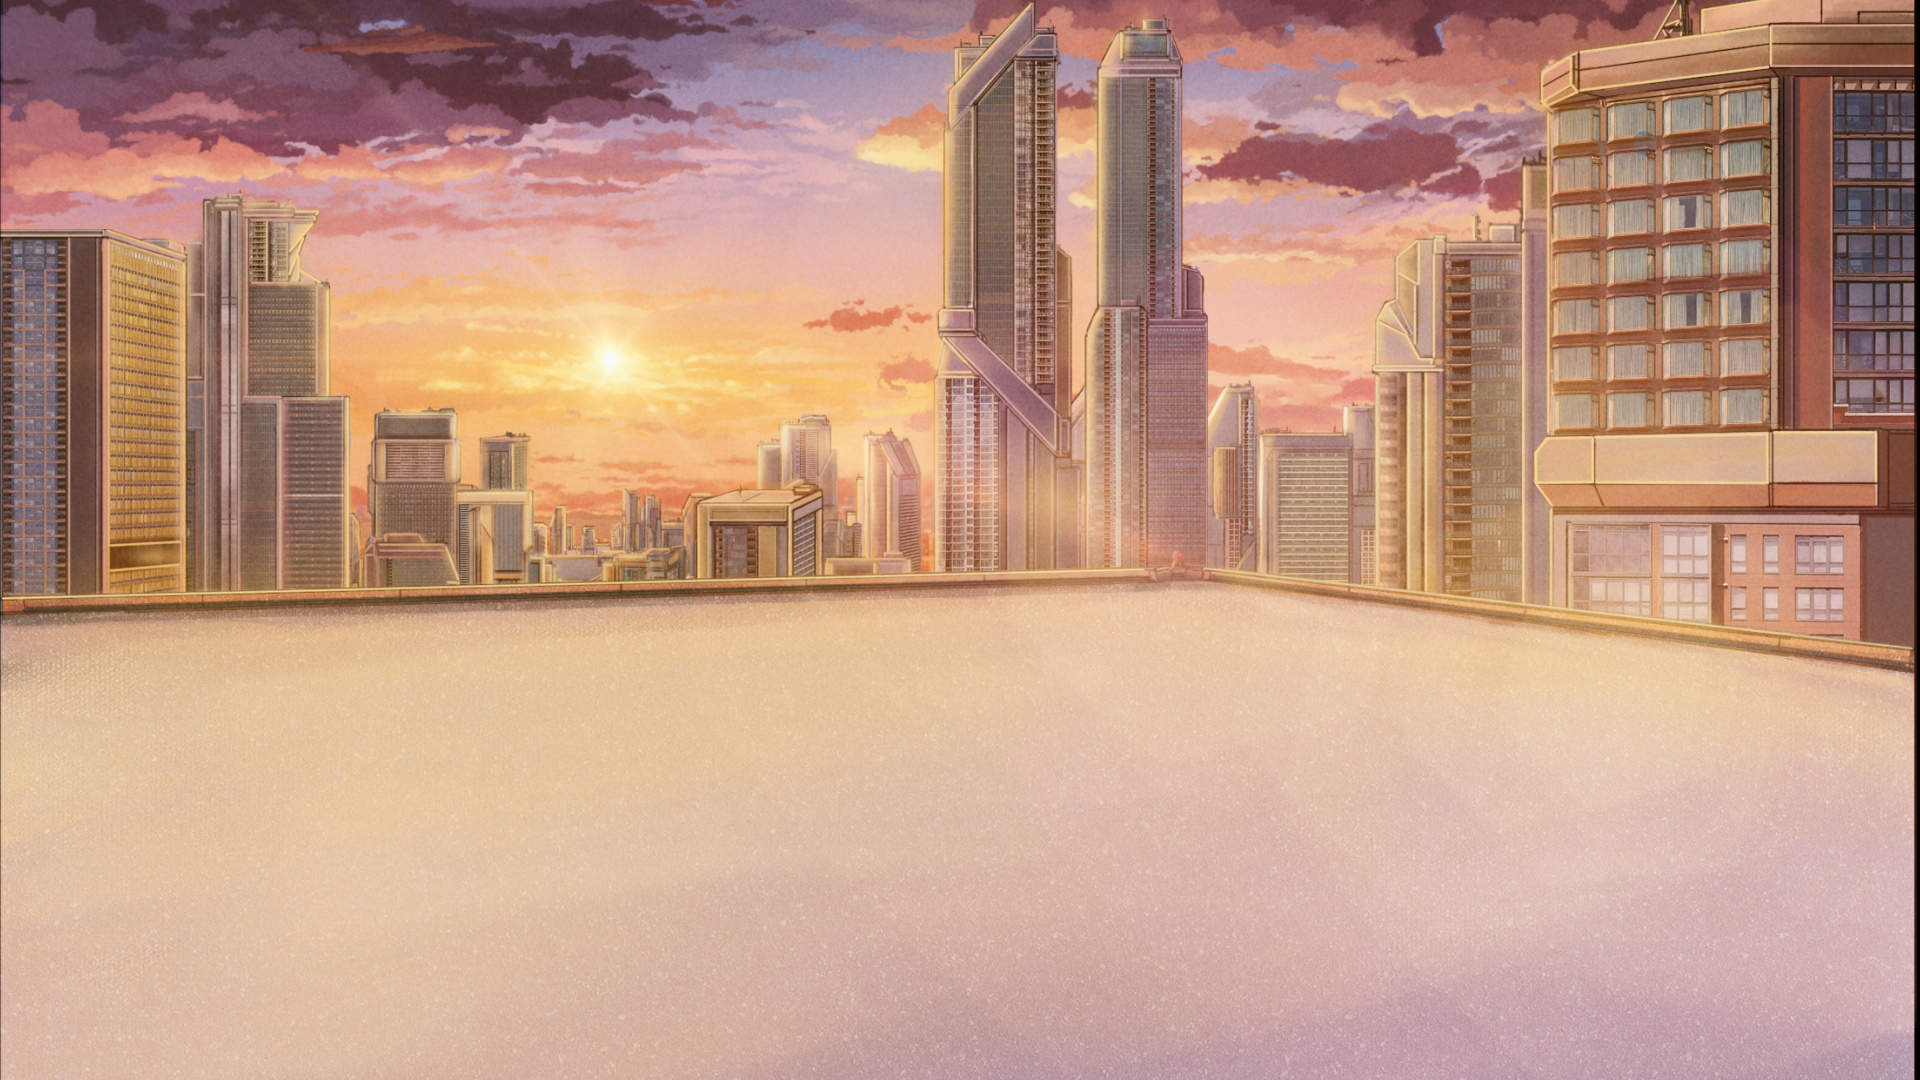 Building Digital Art Anime City City Sunset Glow Sunset Clouds Sky Anime Cityscape Rooftops Outdoors 1920x1080